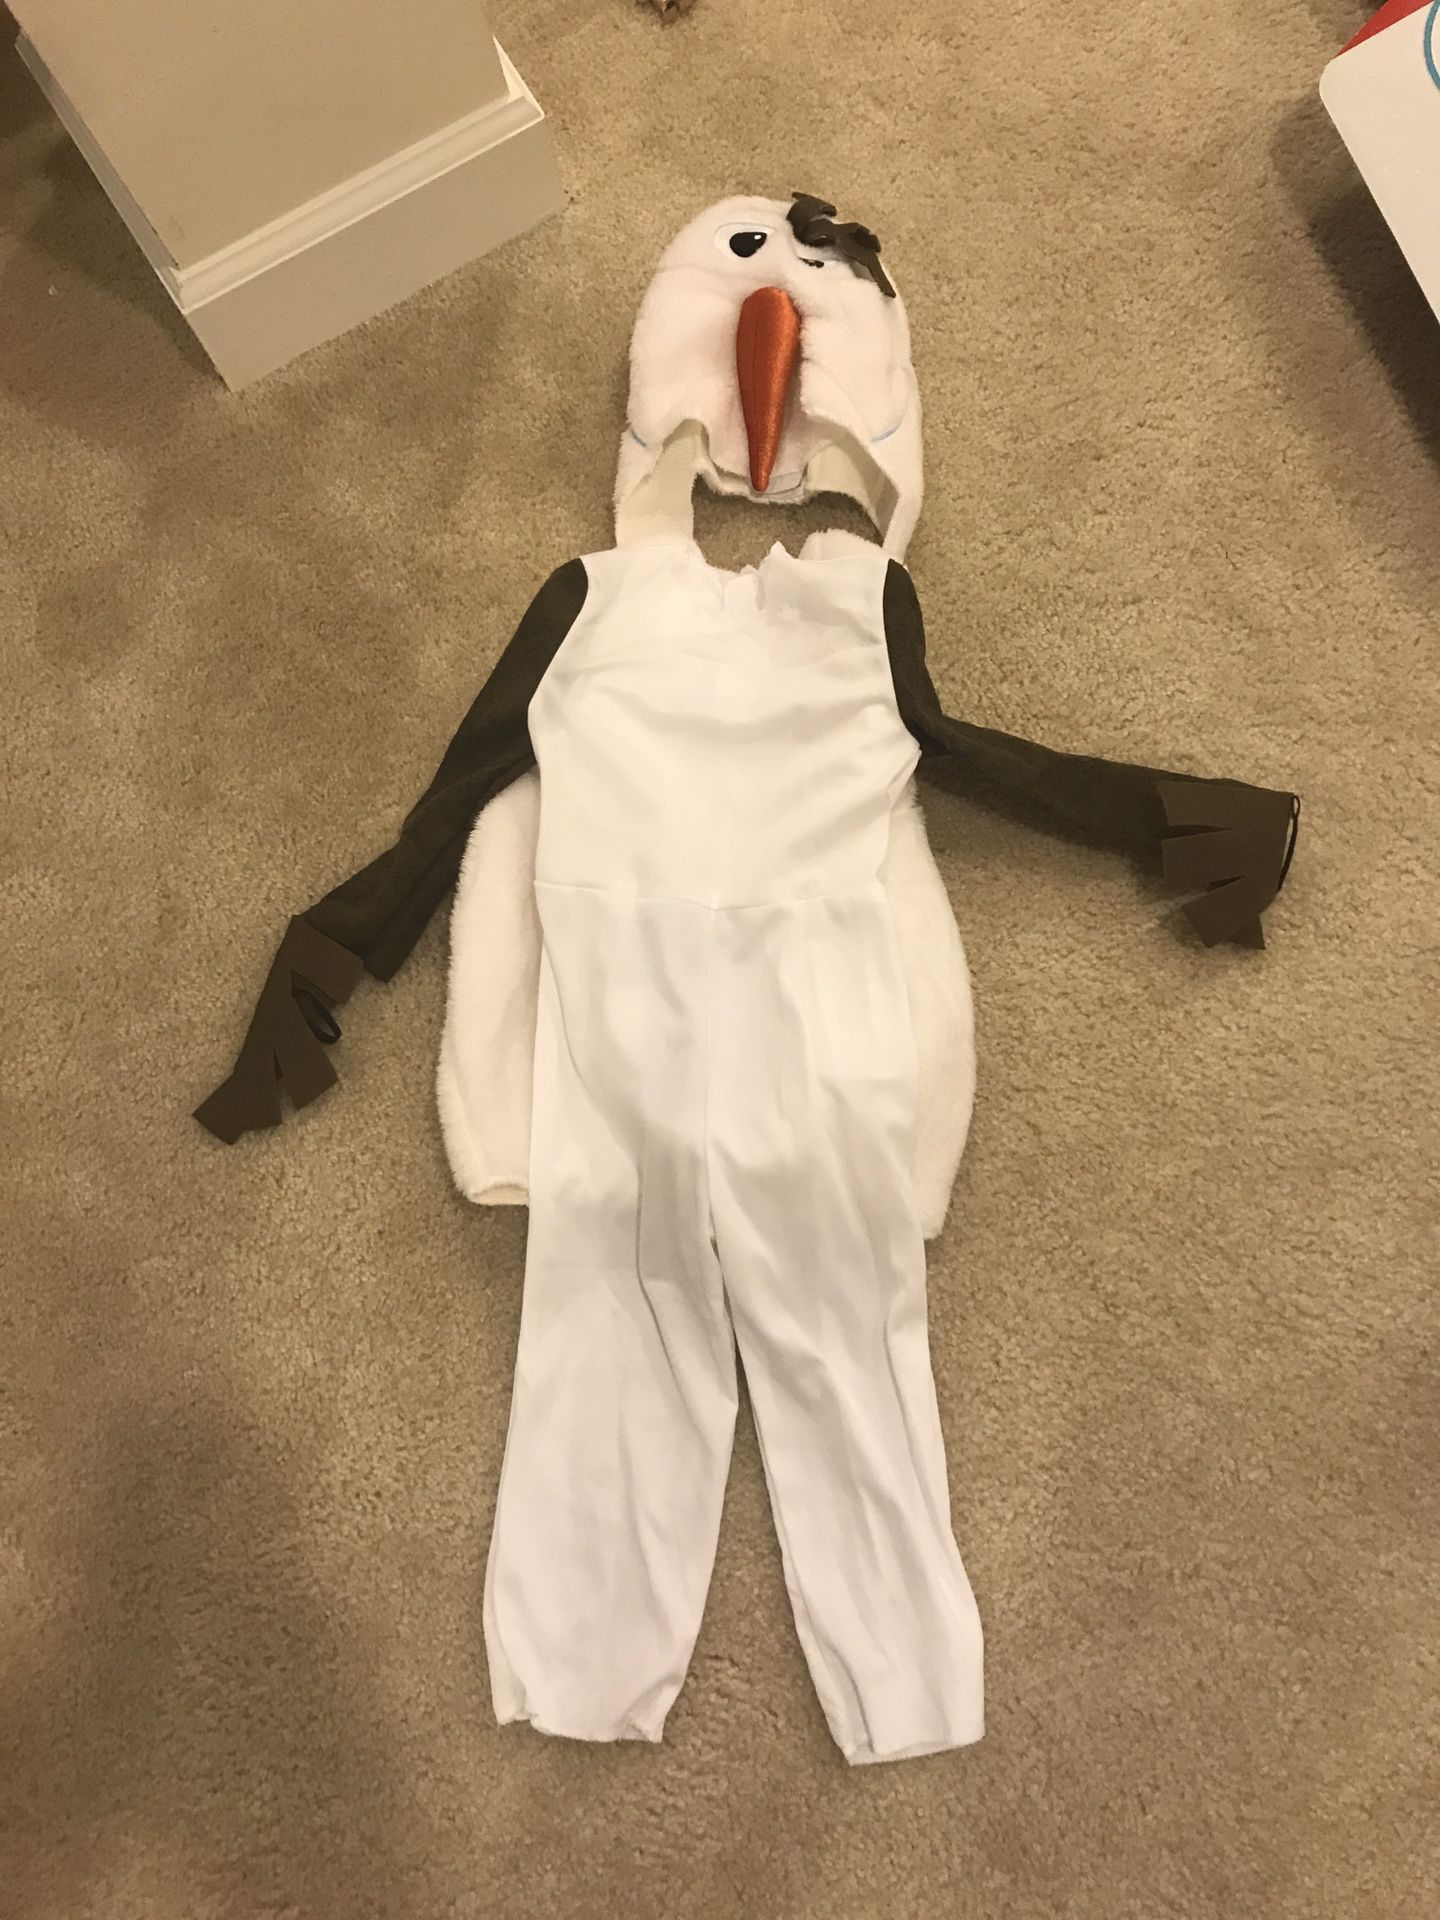 Halloween costume for 2 y.o.